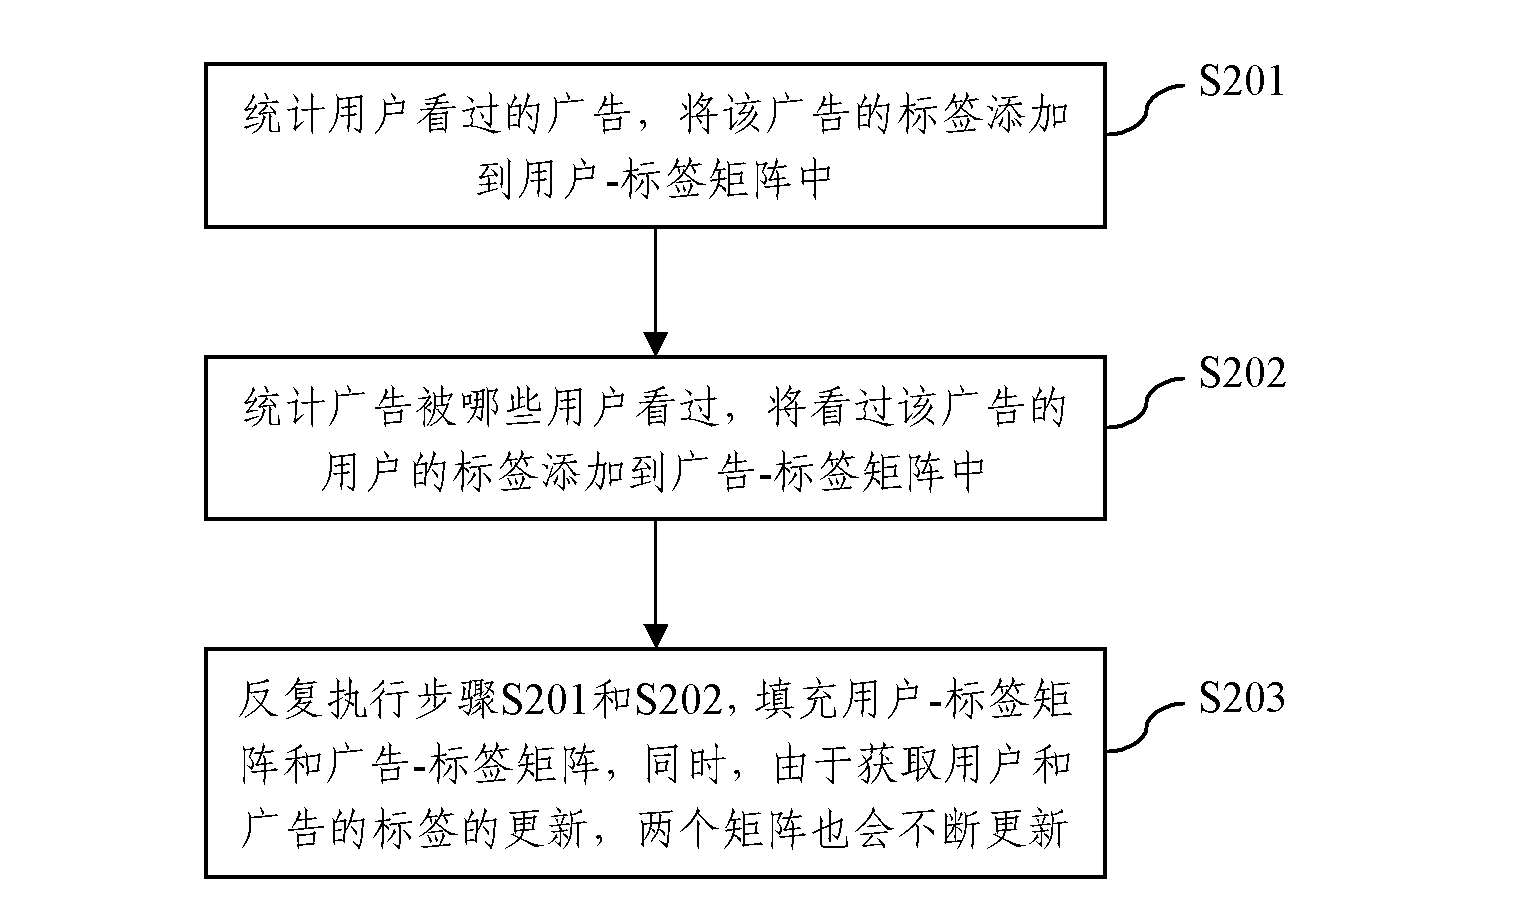 Method for accurately delivering Internet video advertisement based on label